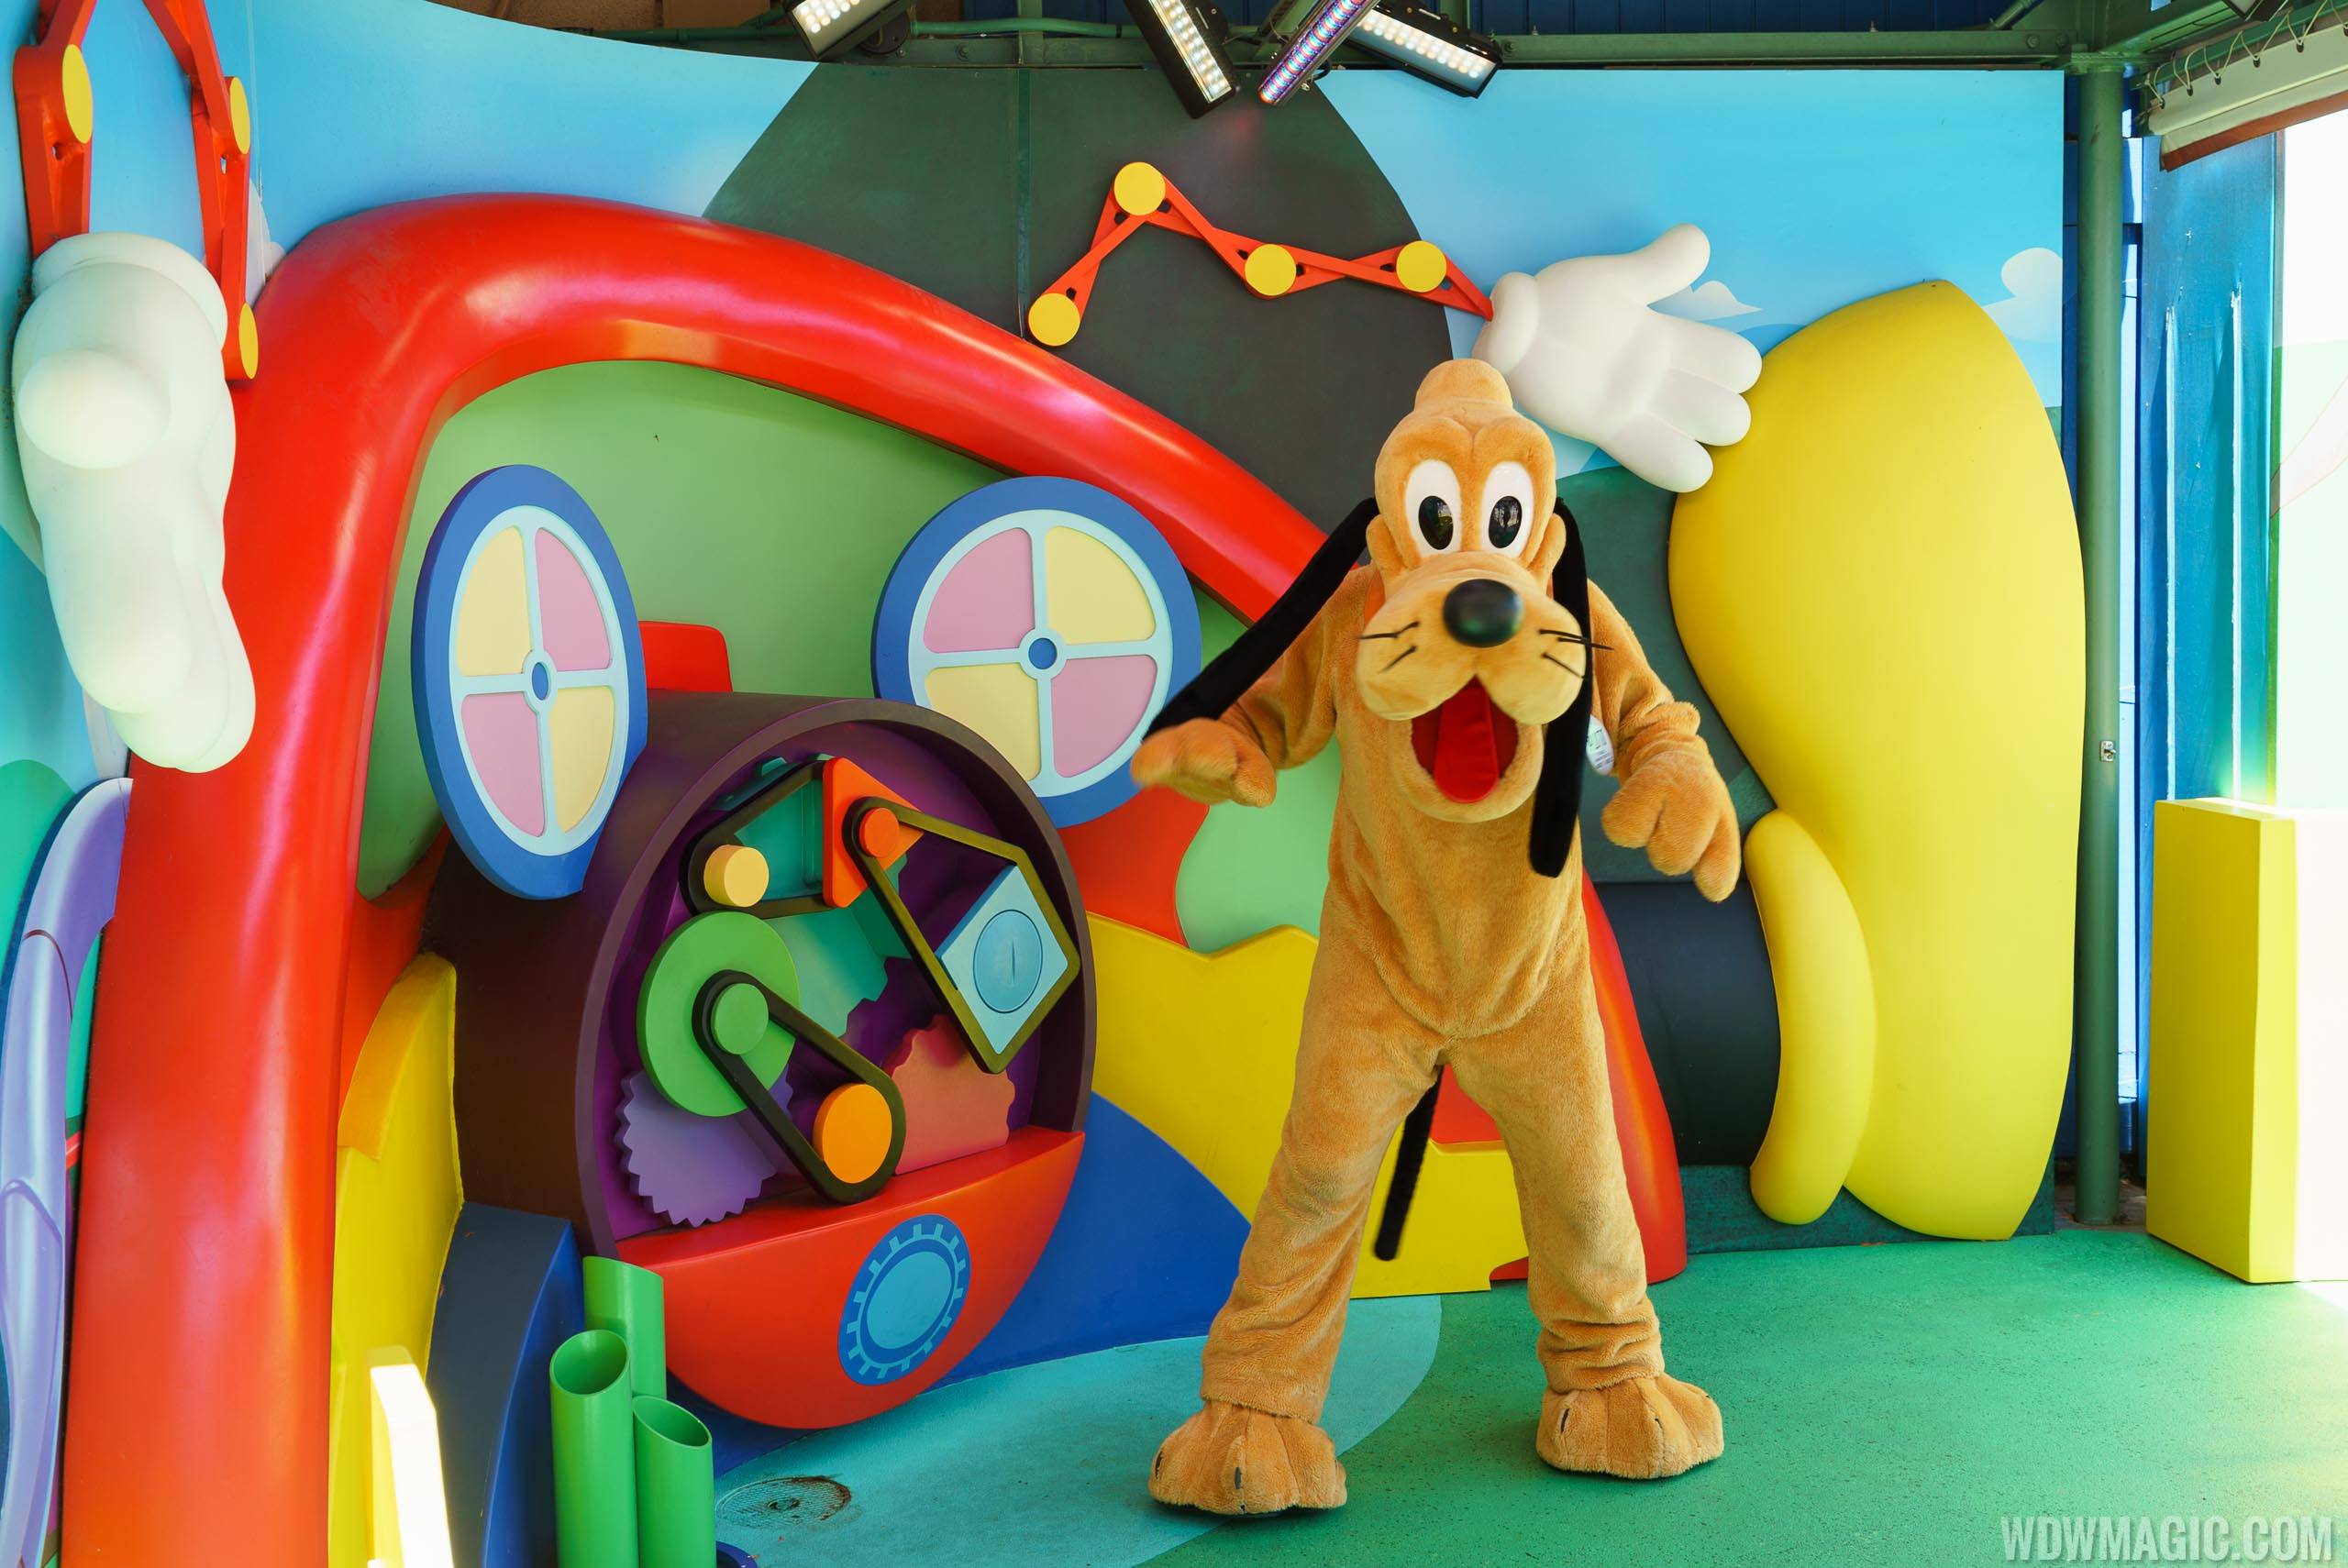 PHOTOS - Pluto now appearing at the Disney Junior meet and greet in Disney's Hollywood Studios